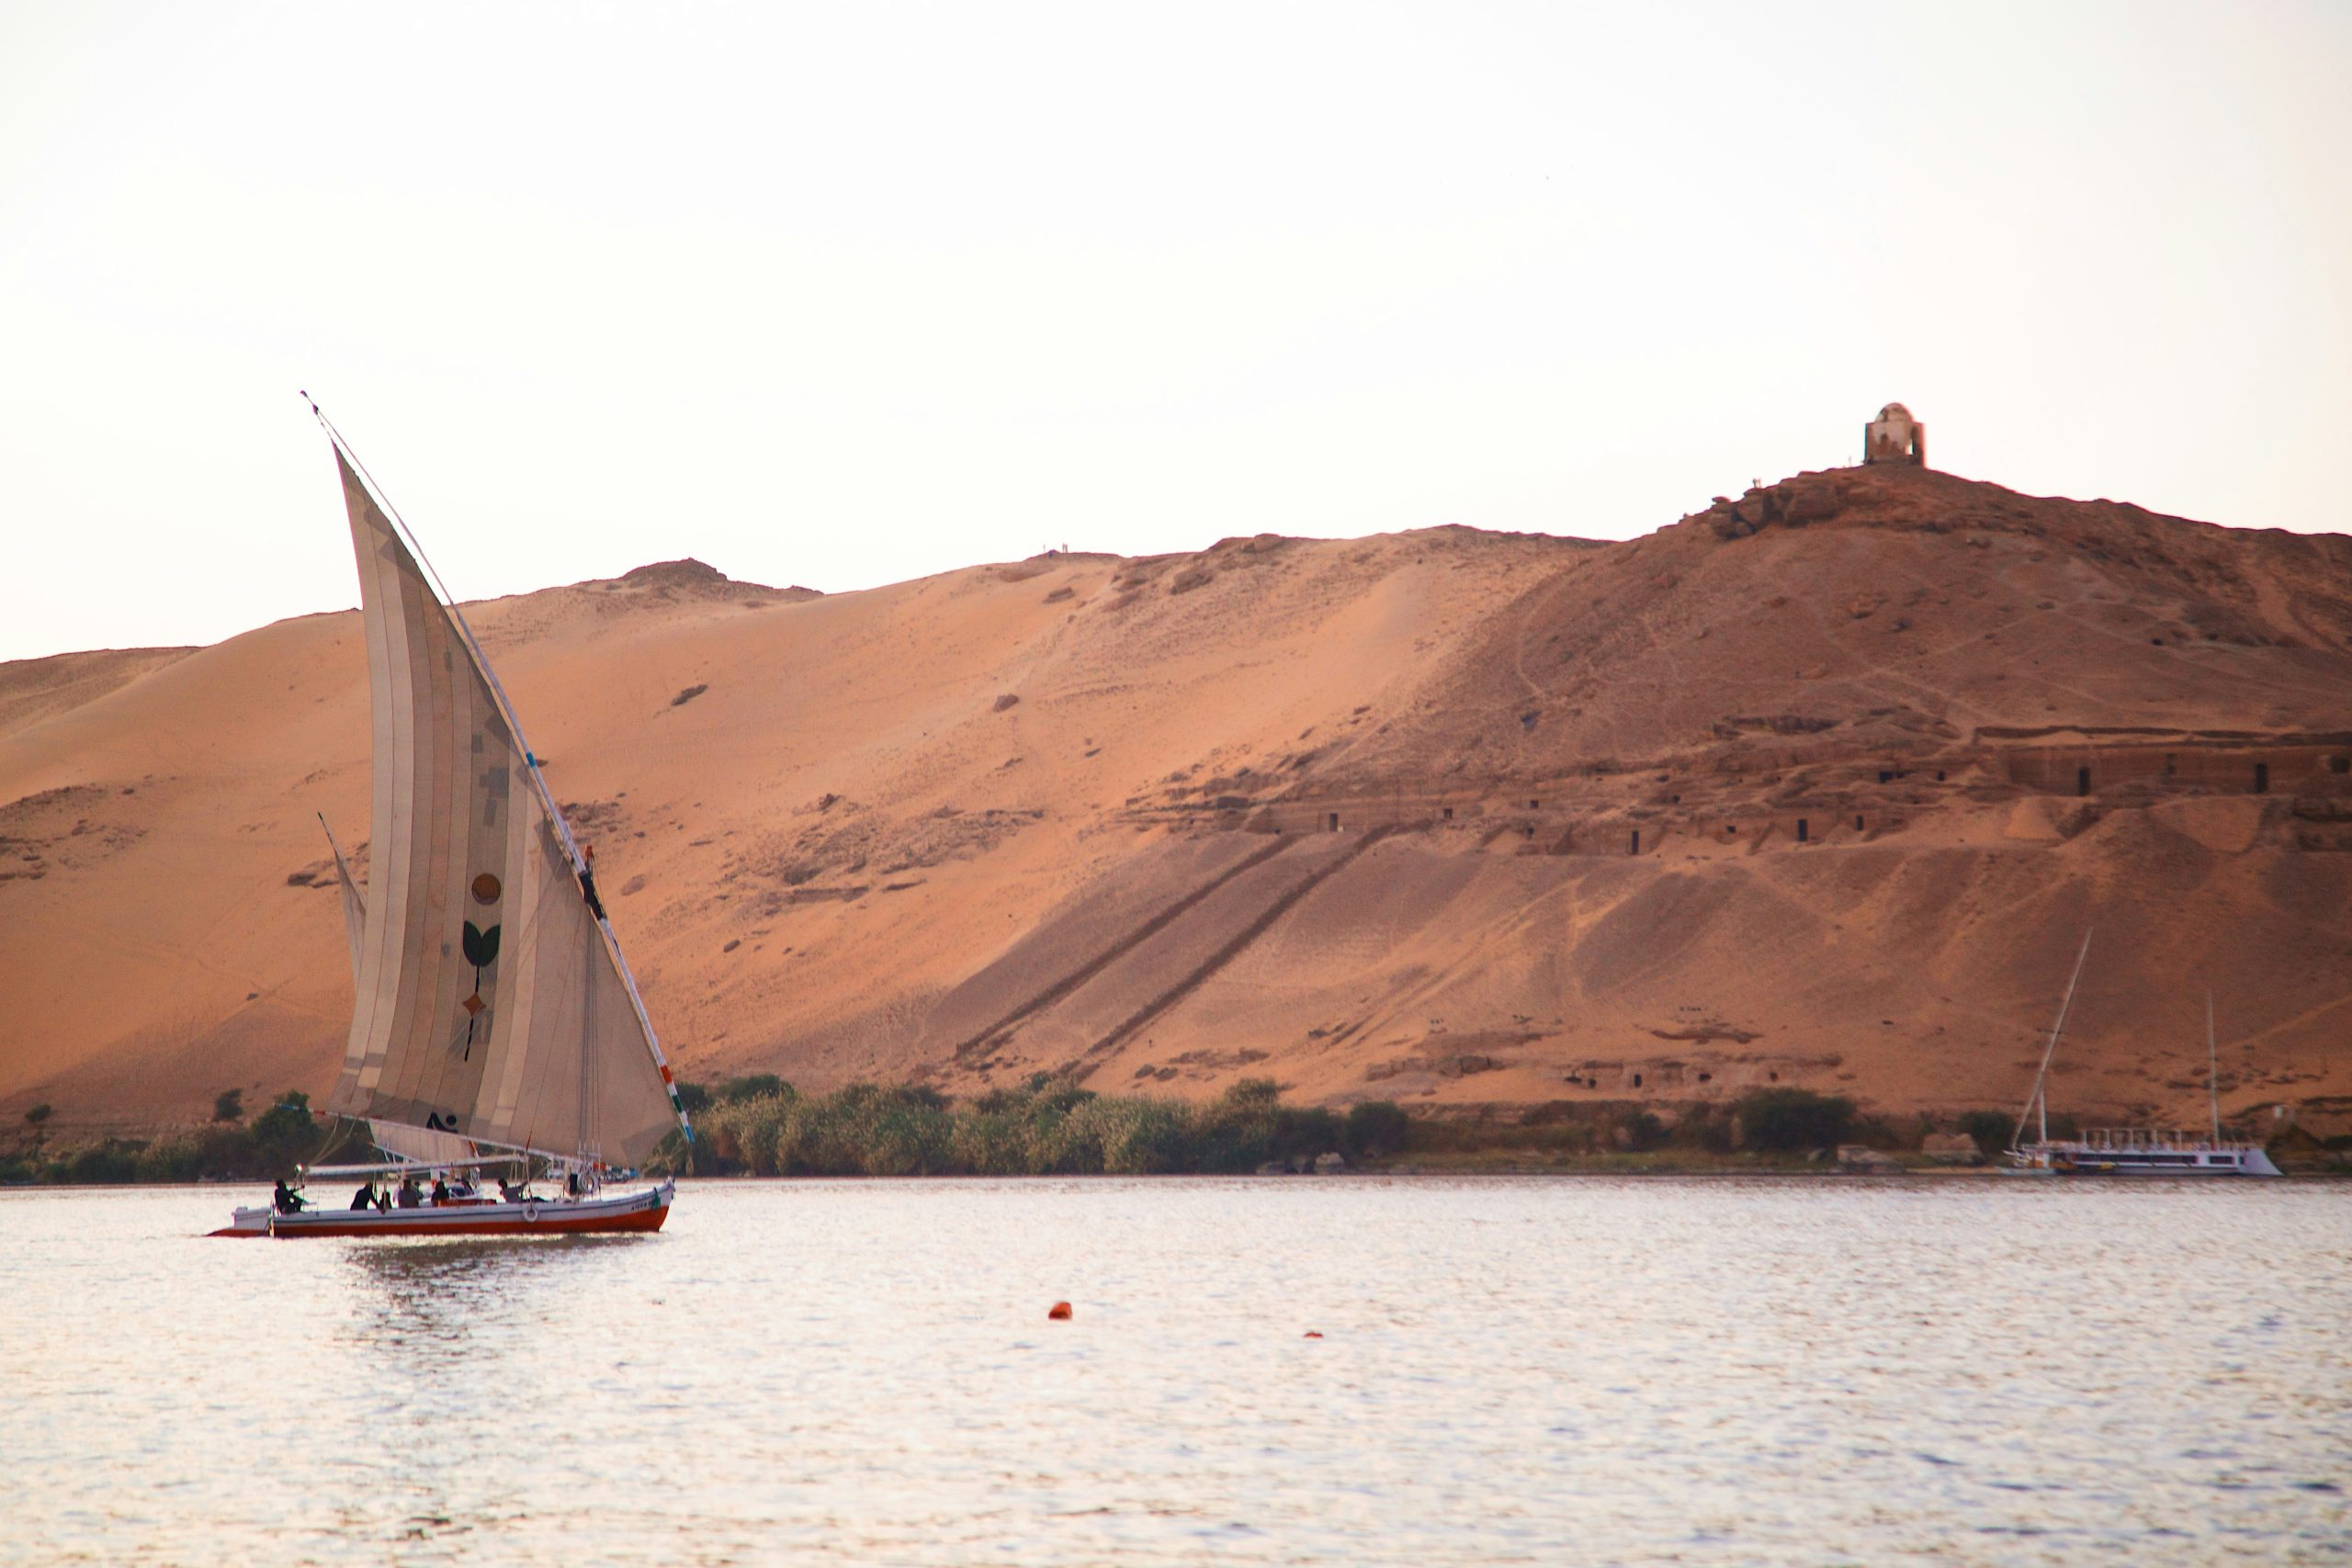 discover the ancient wonders of egypt on a luxurious nile cruise. explore historic sites, immerse yourself in local culture, and enjoy breathtaking river views on a nile cruise adventure.